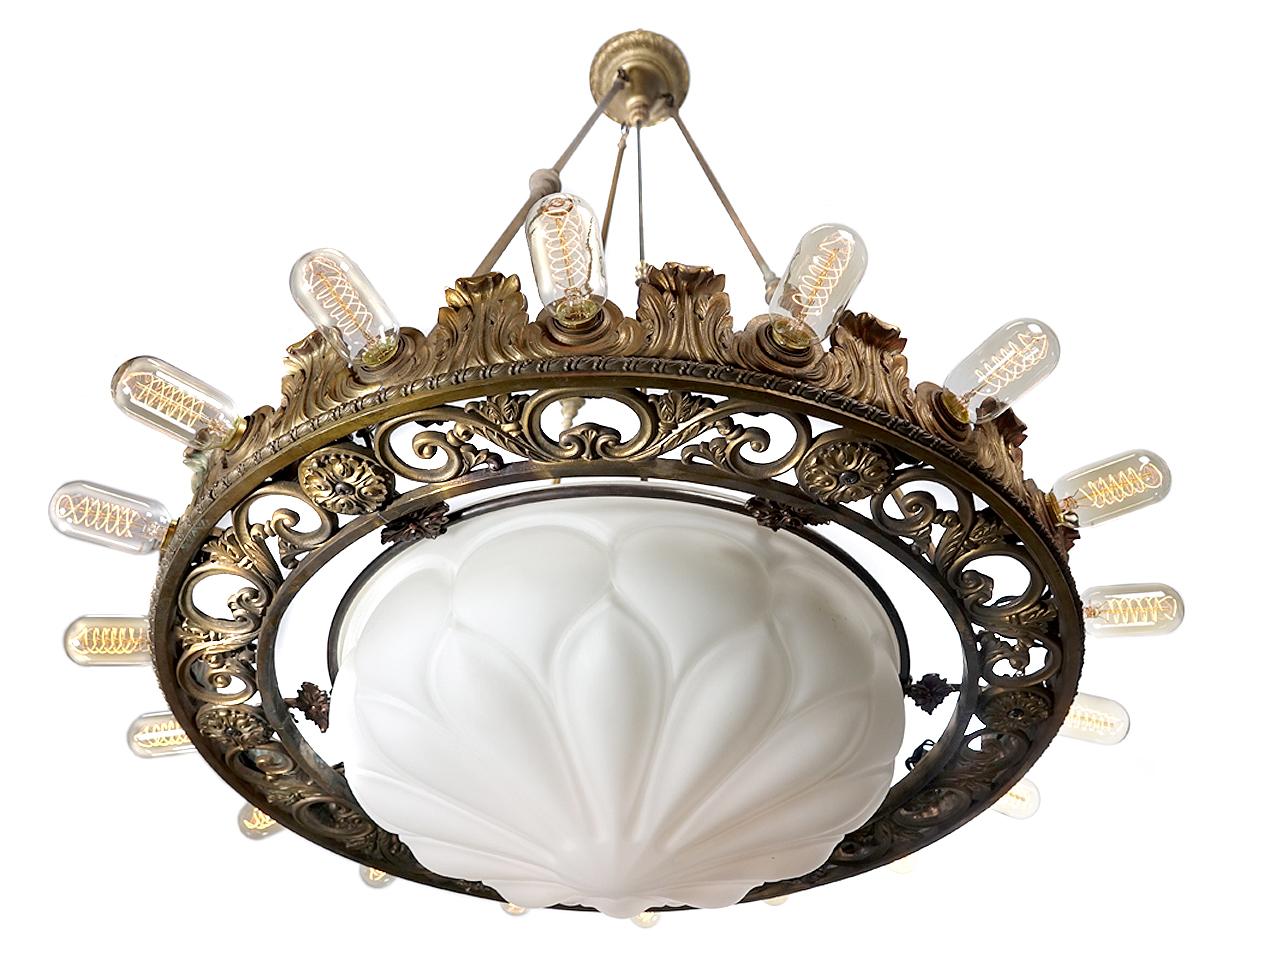 This monumental Revival style chandelier is quite a center piece. Its ornate cast and stamped bronze with an amazing and heavy cast mat white milk glass glove. Outside the bronze ring are 18 bulbs and 4 additional bulbs in the globe. It's unsigned